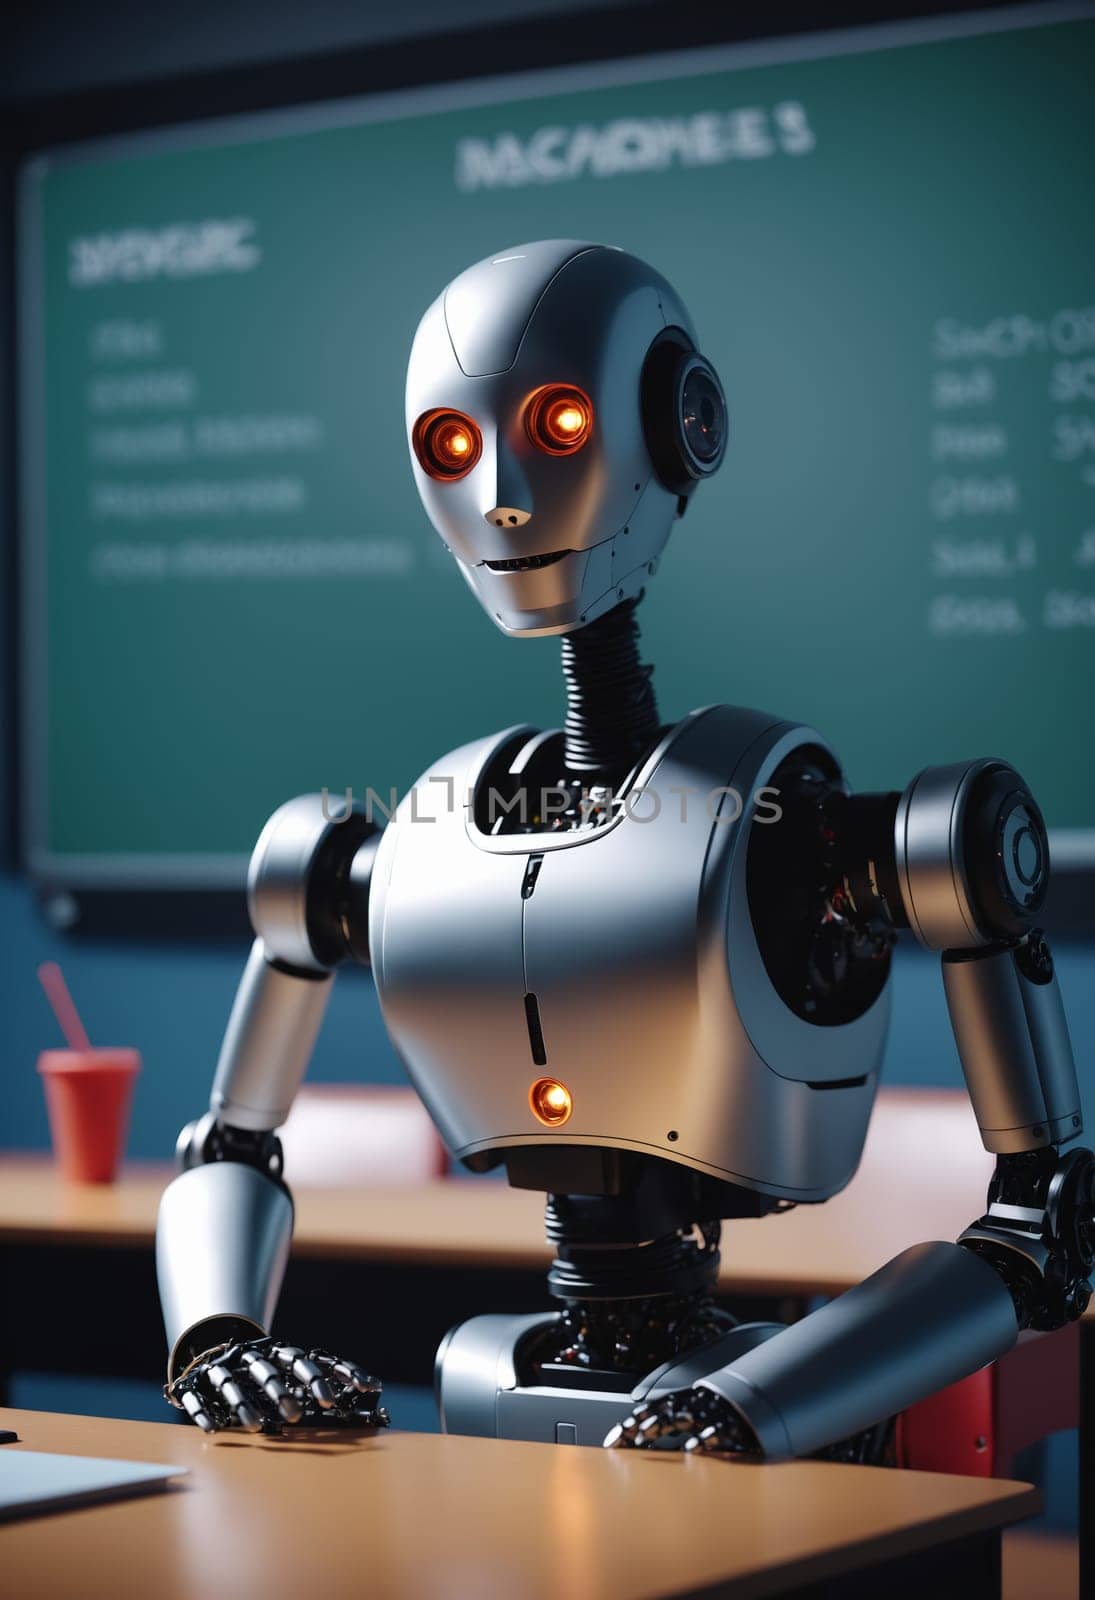 A machine is on a desk in a classroom, as a robot sits next to it by Andre1ns